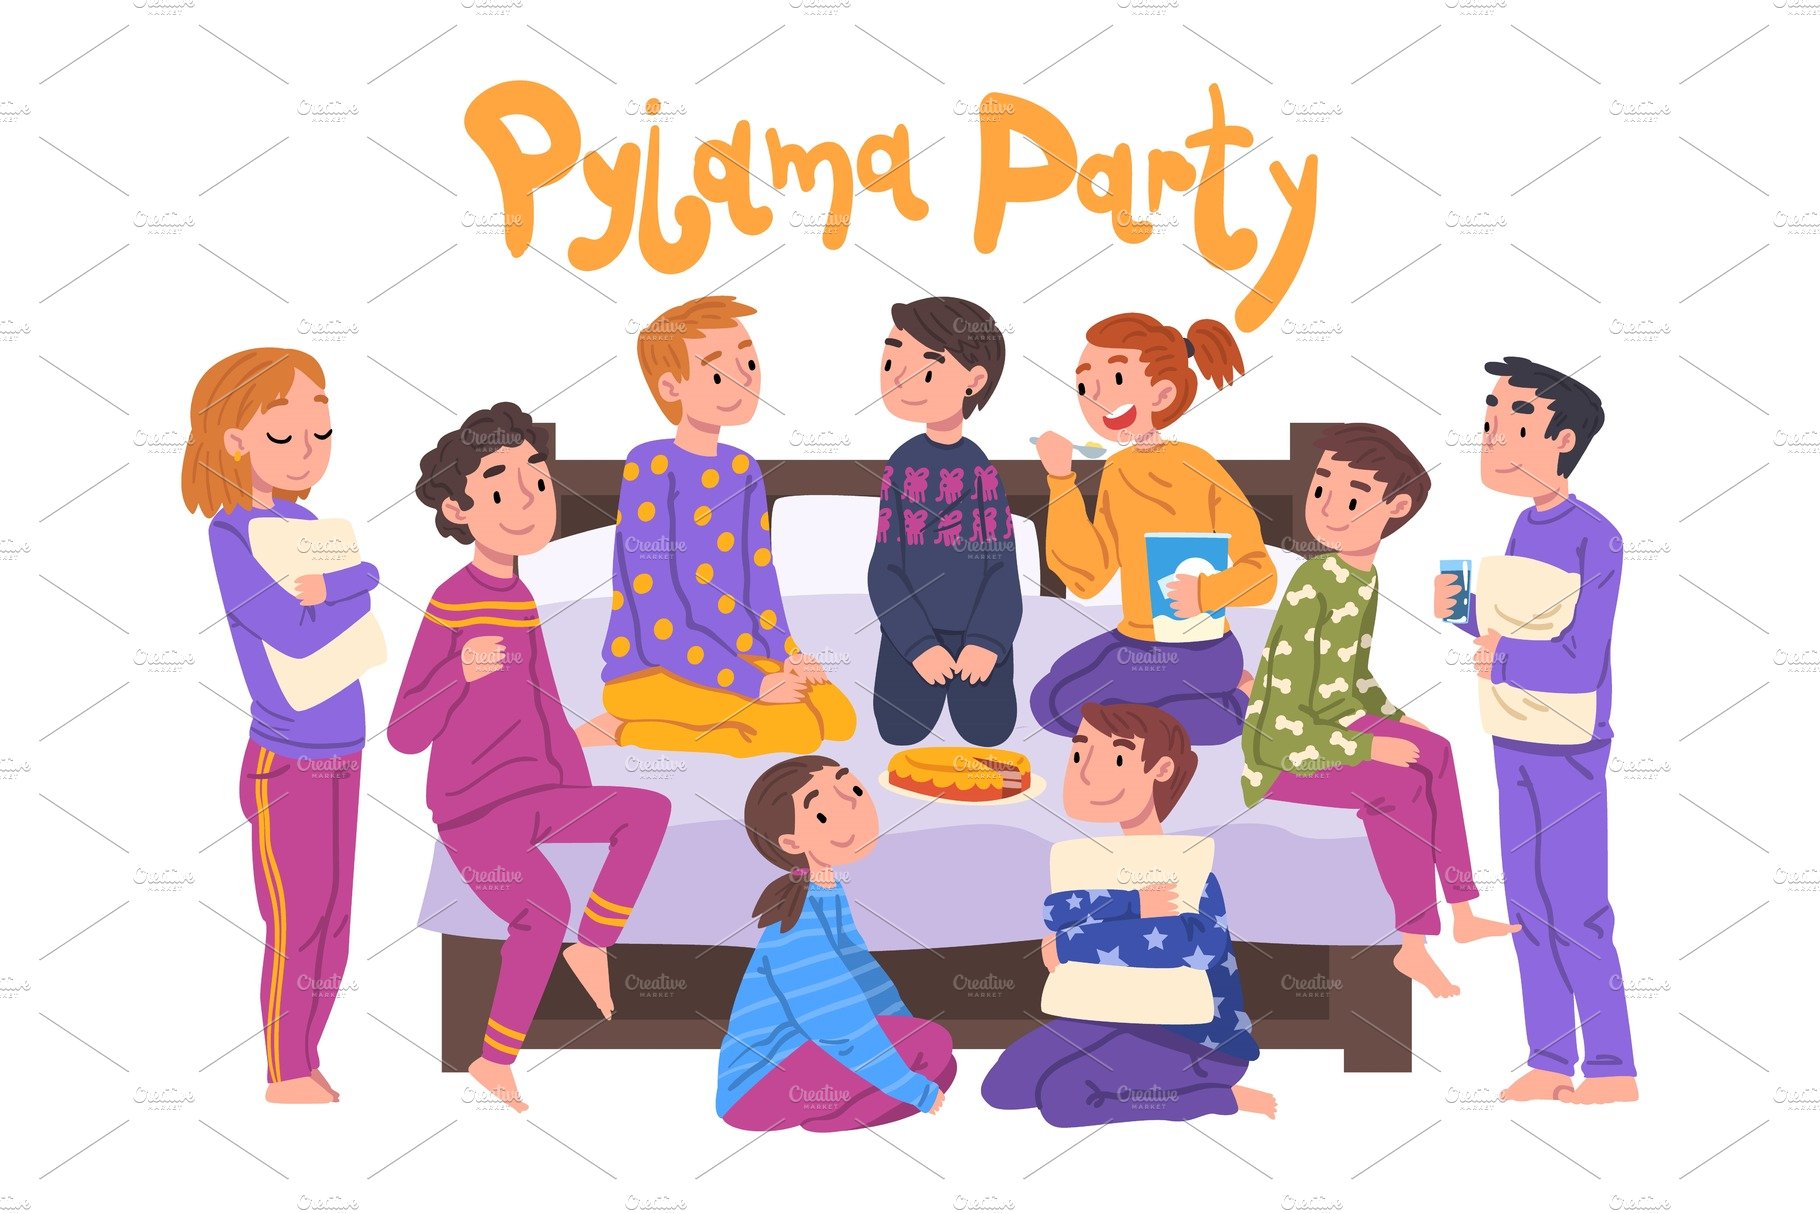 Friends Having Fun on Pajama Party cover image.